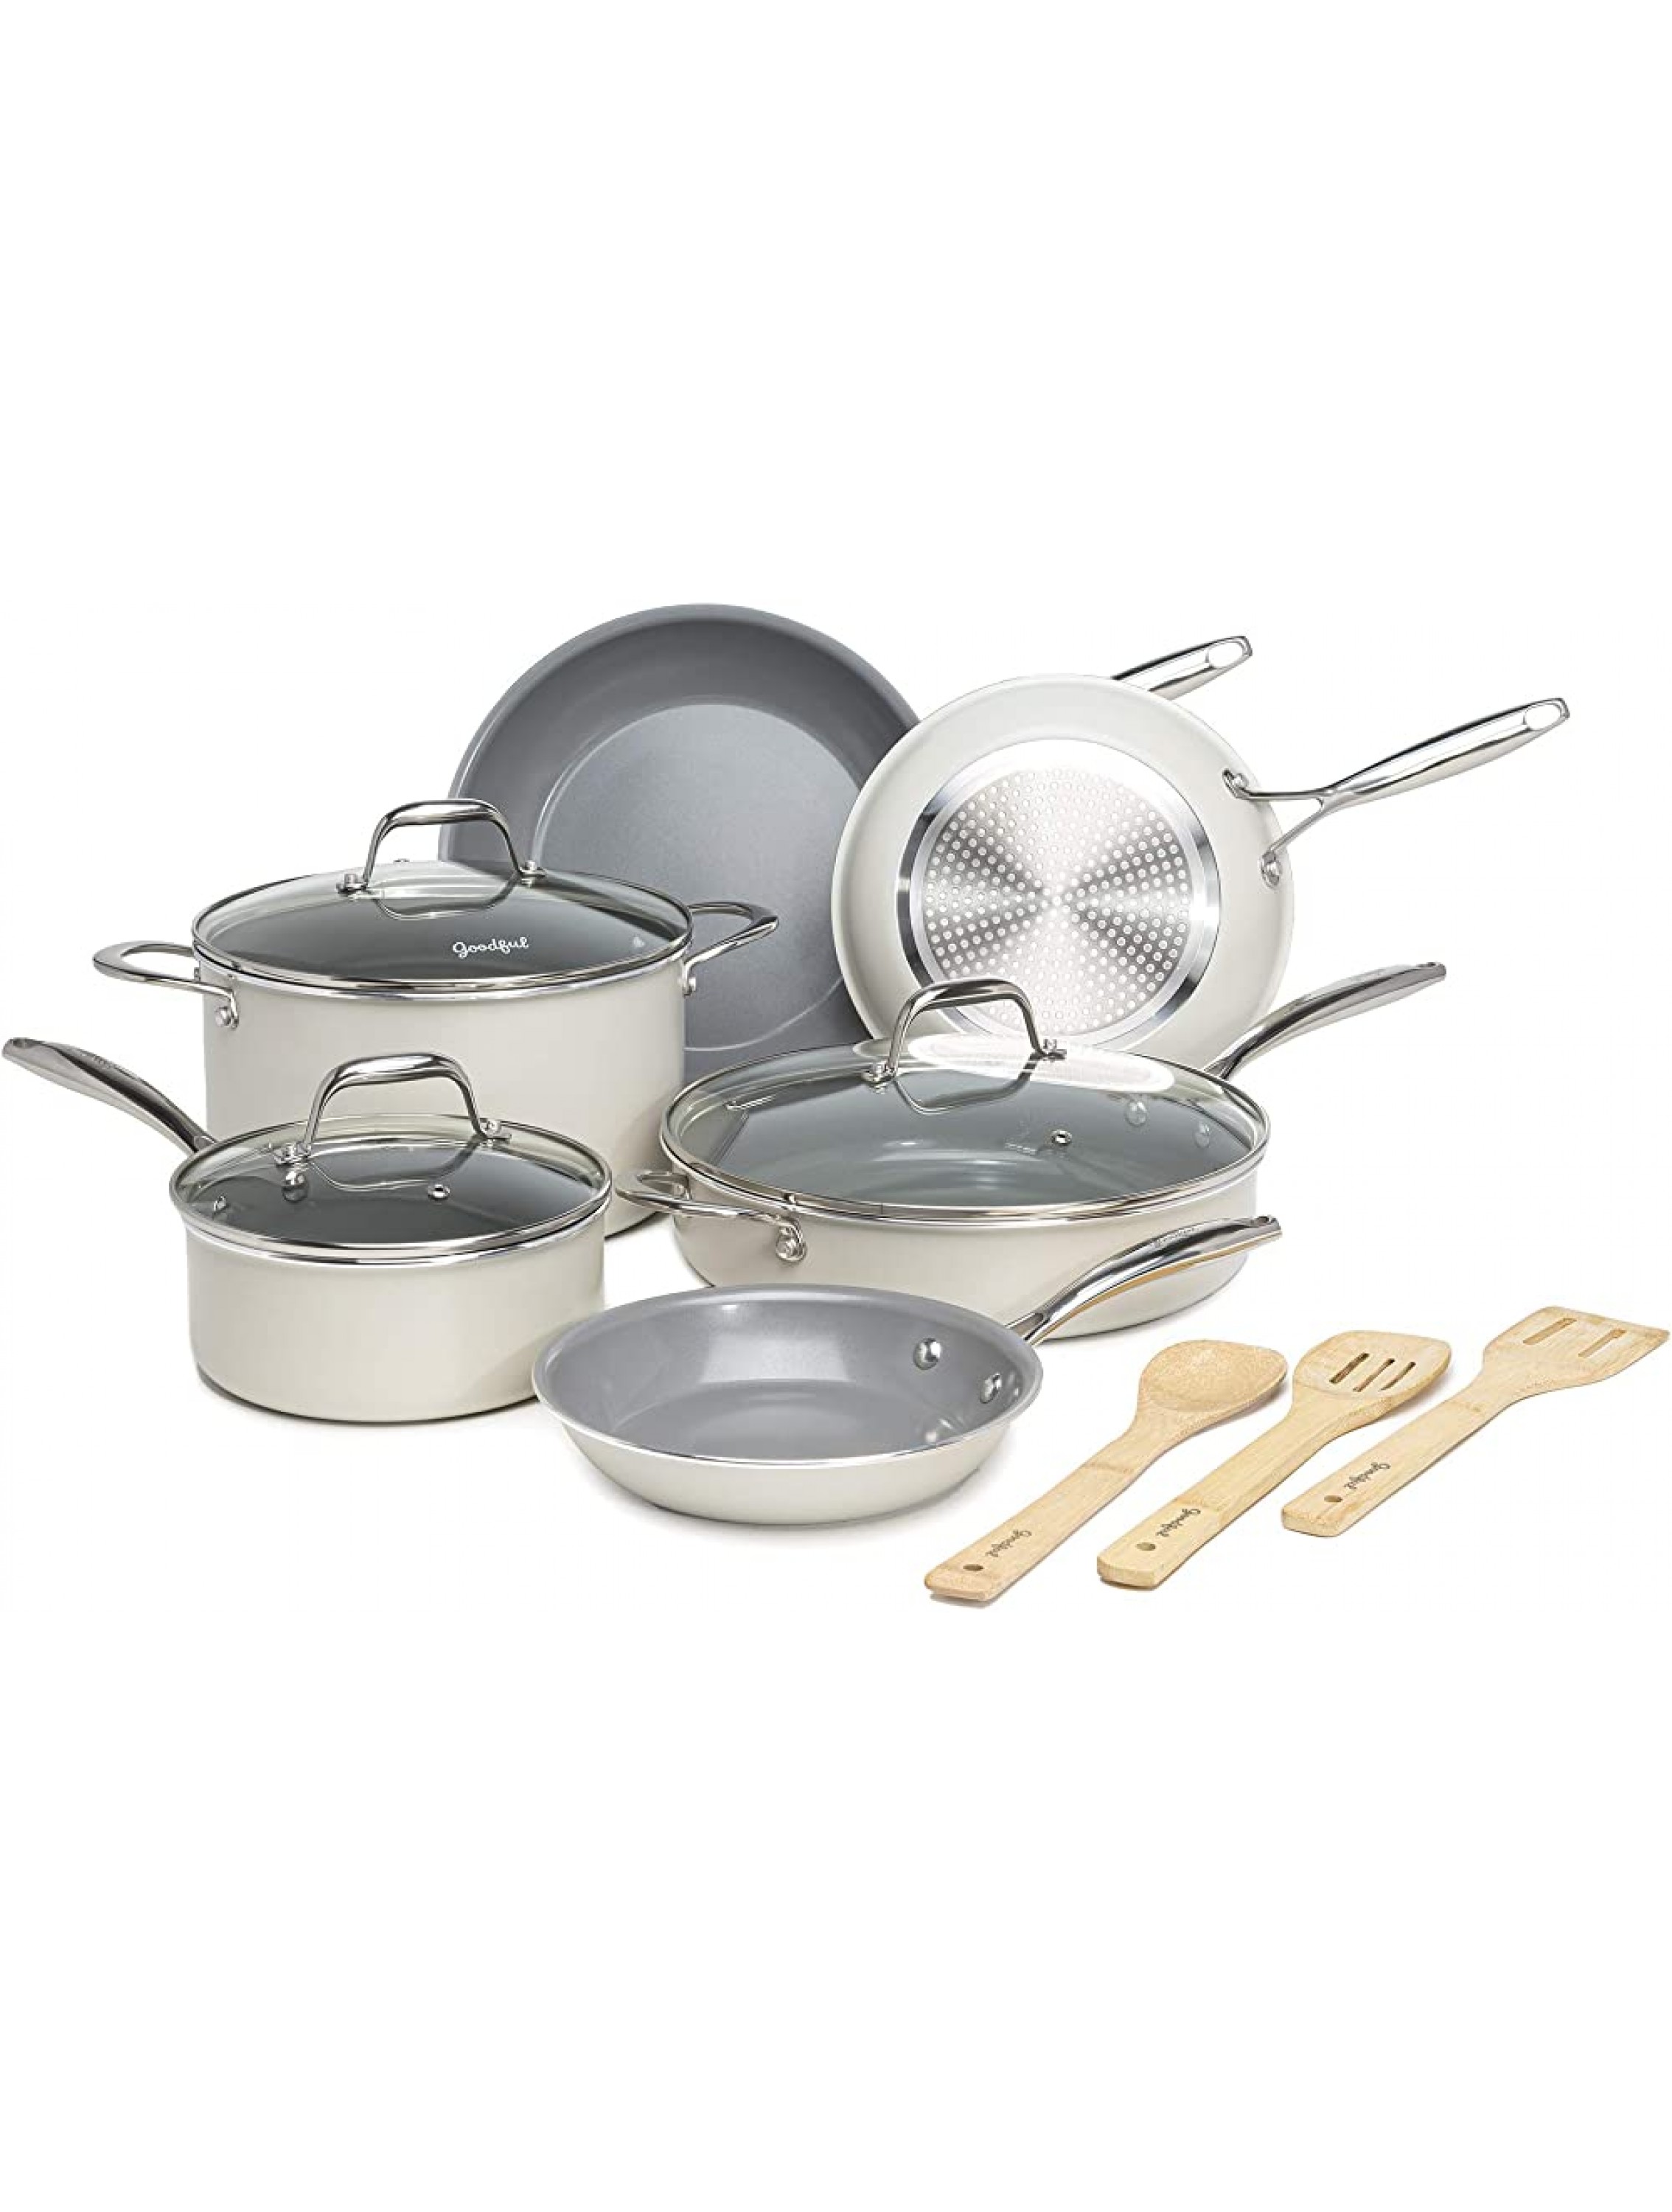 Goodful 12 Piece Cookware Set with Titanium-Reinforced Premium Non-Stick Coating Dishwasher Safe Pots and Pans Tempered Glass Steam Vented Lids Stainless Steel Handles Cream - BPRVUKNUD